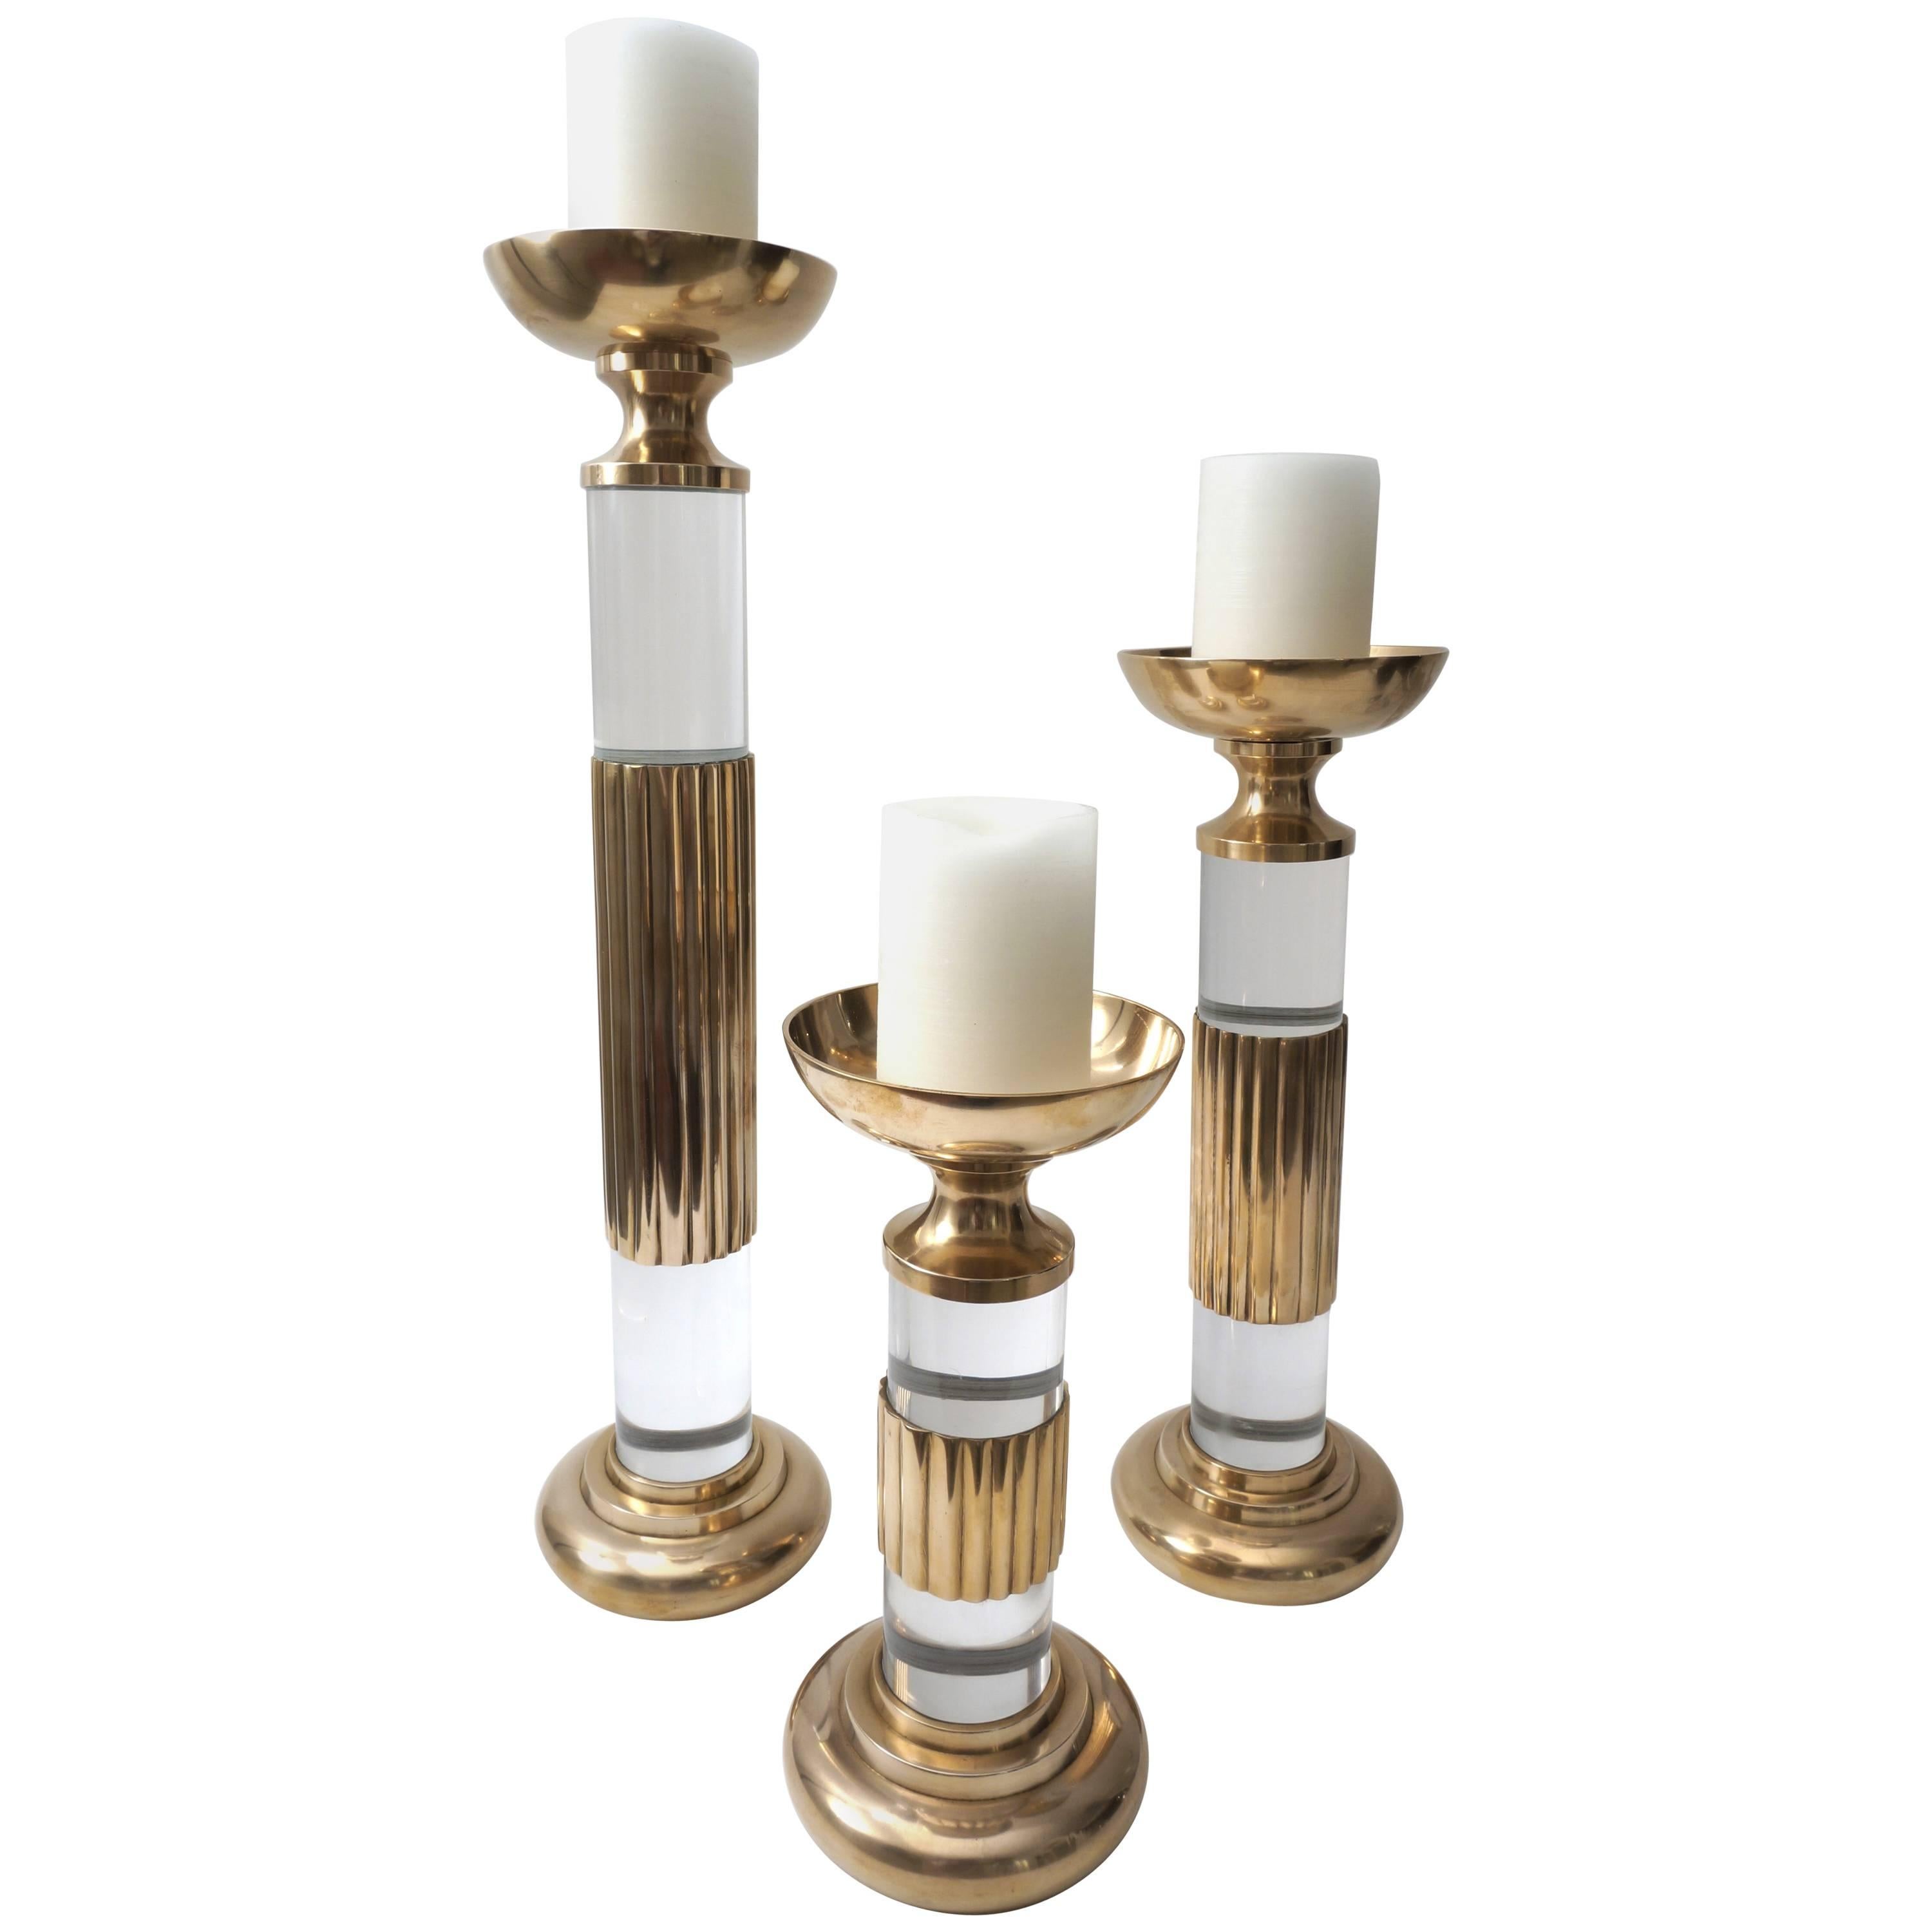 Set of Three Candlesticks in Brass and Lucite